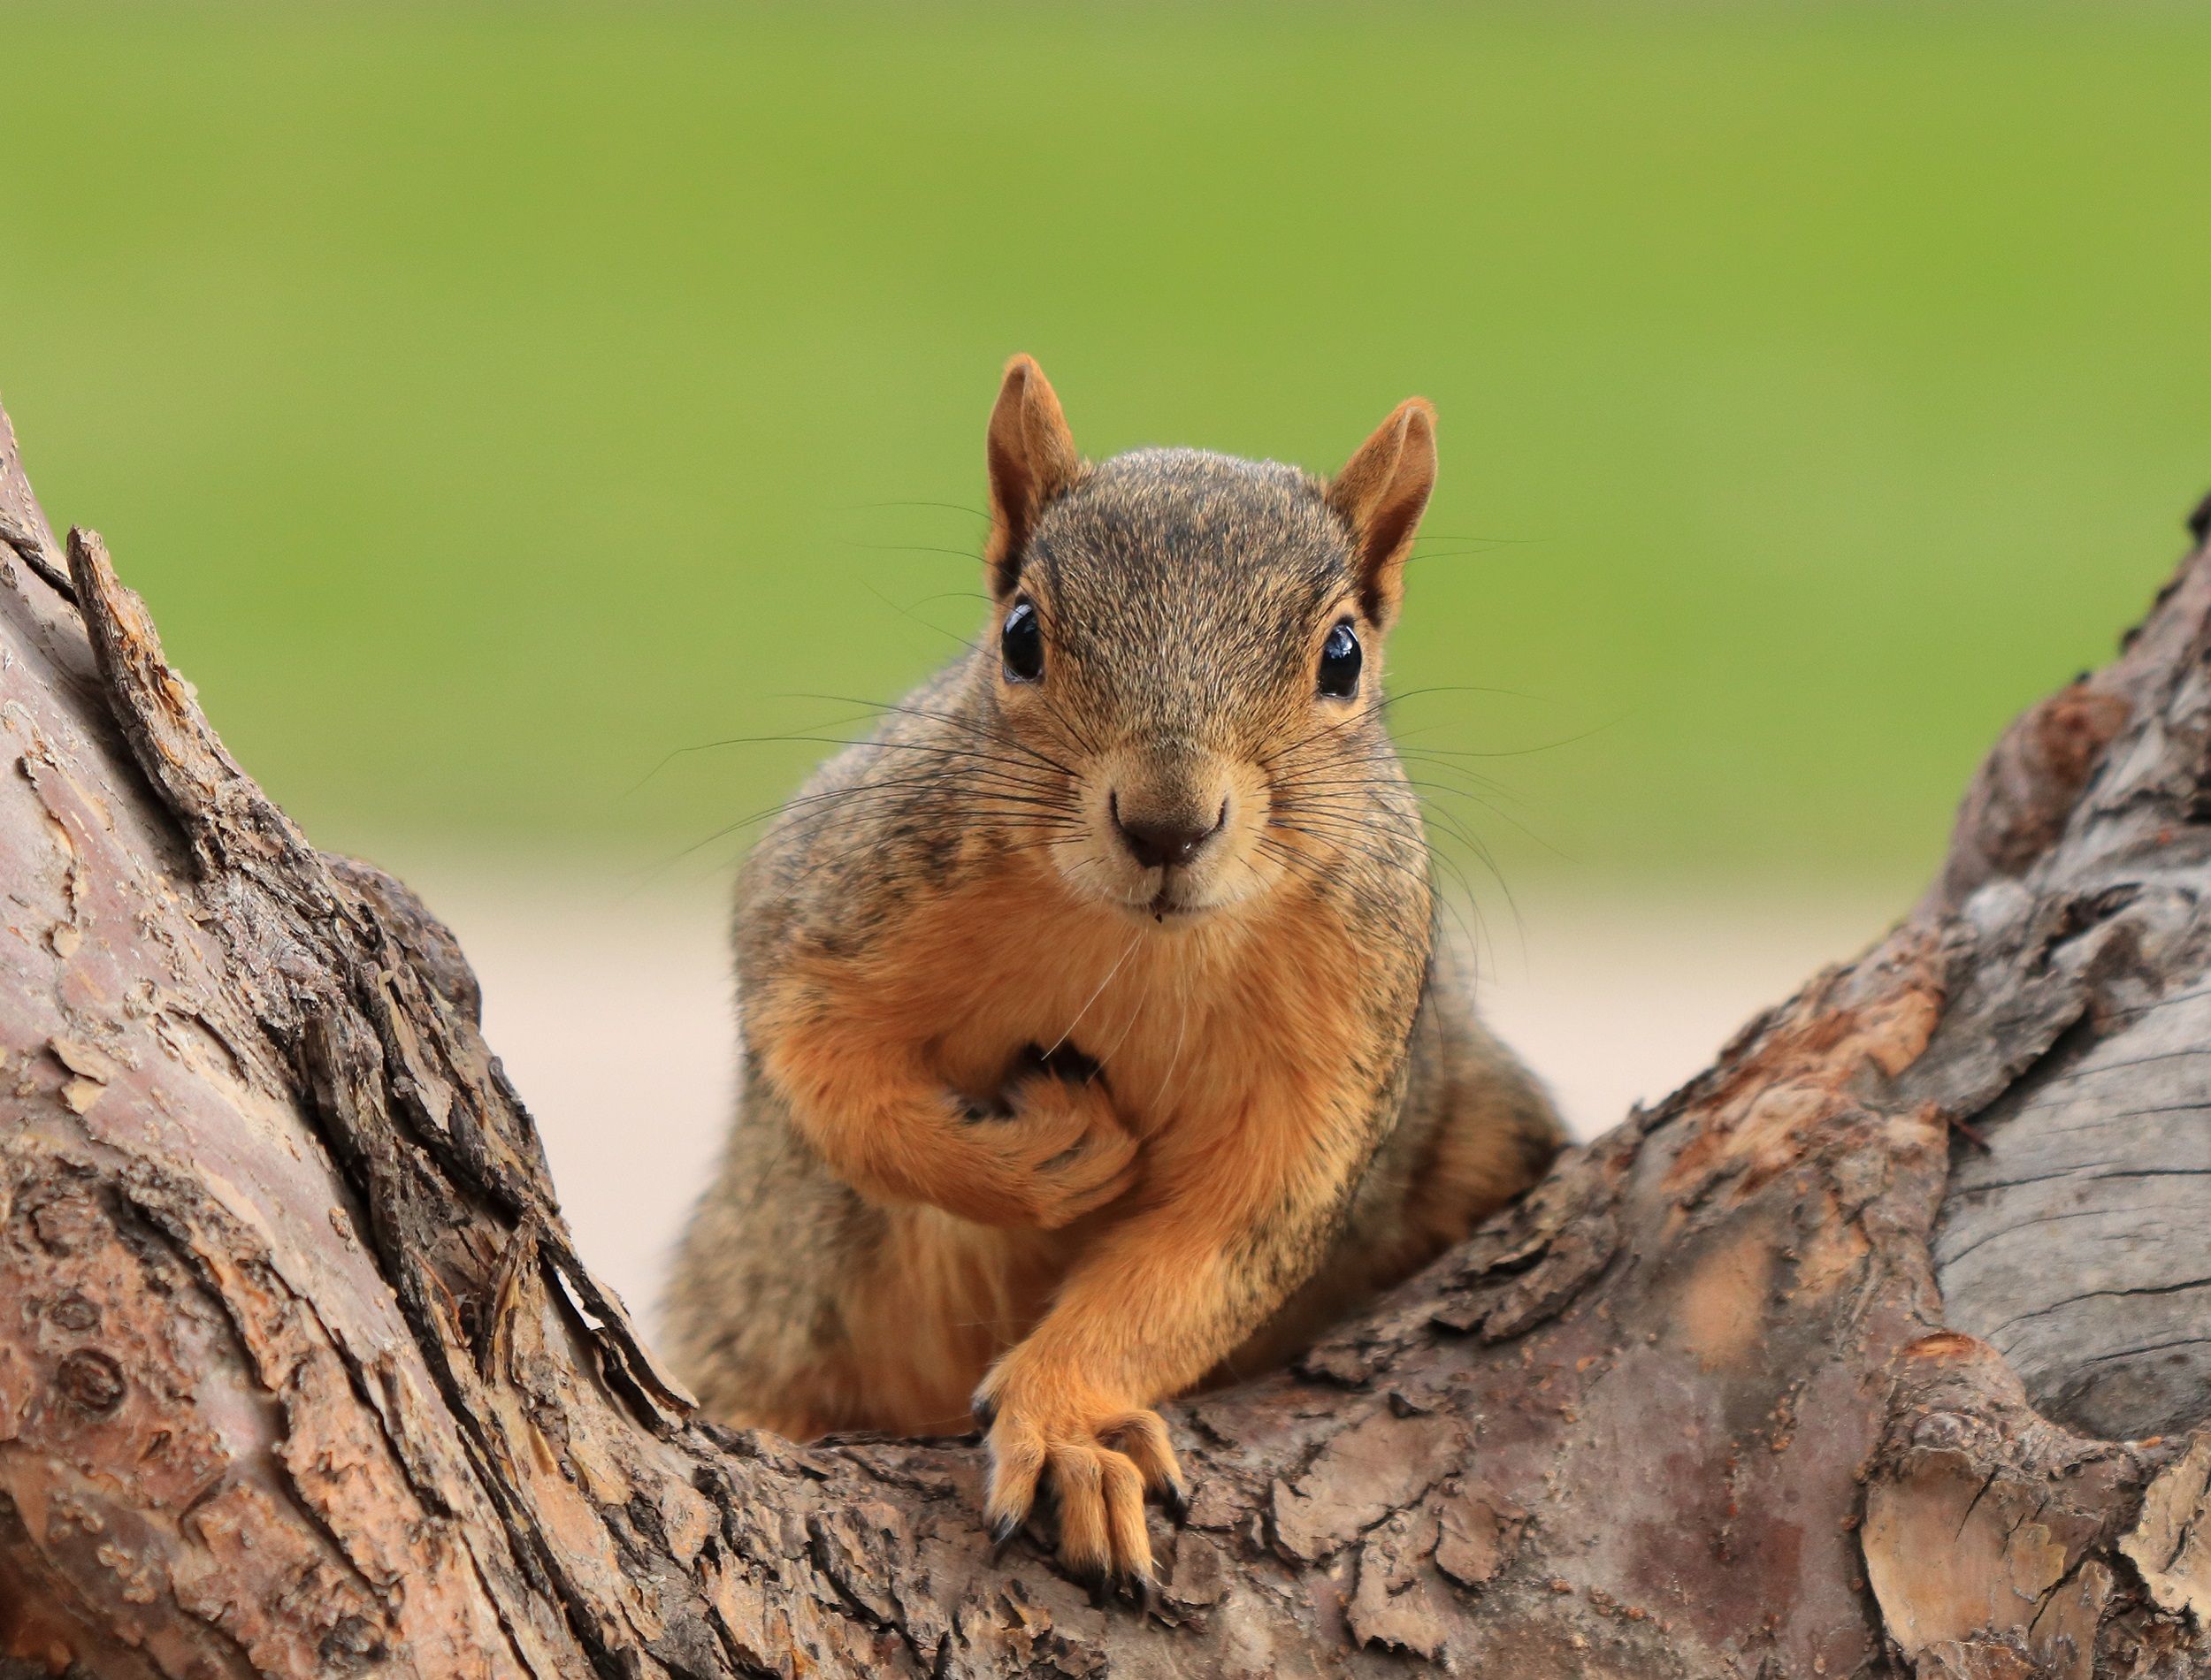 Squirrel in the crook of a tree holding a nut staring at the camera